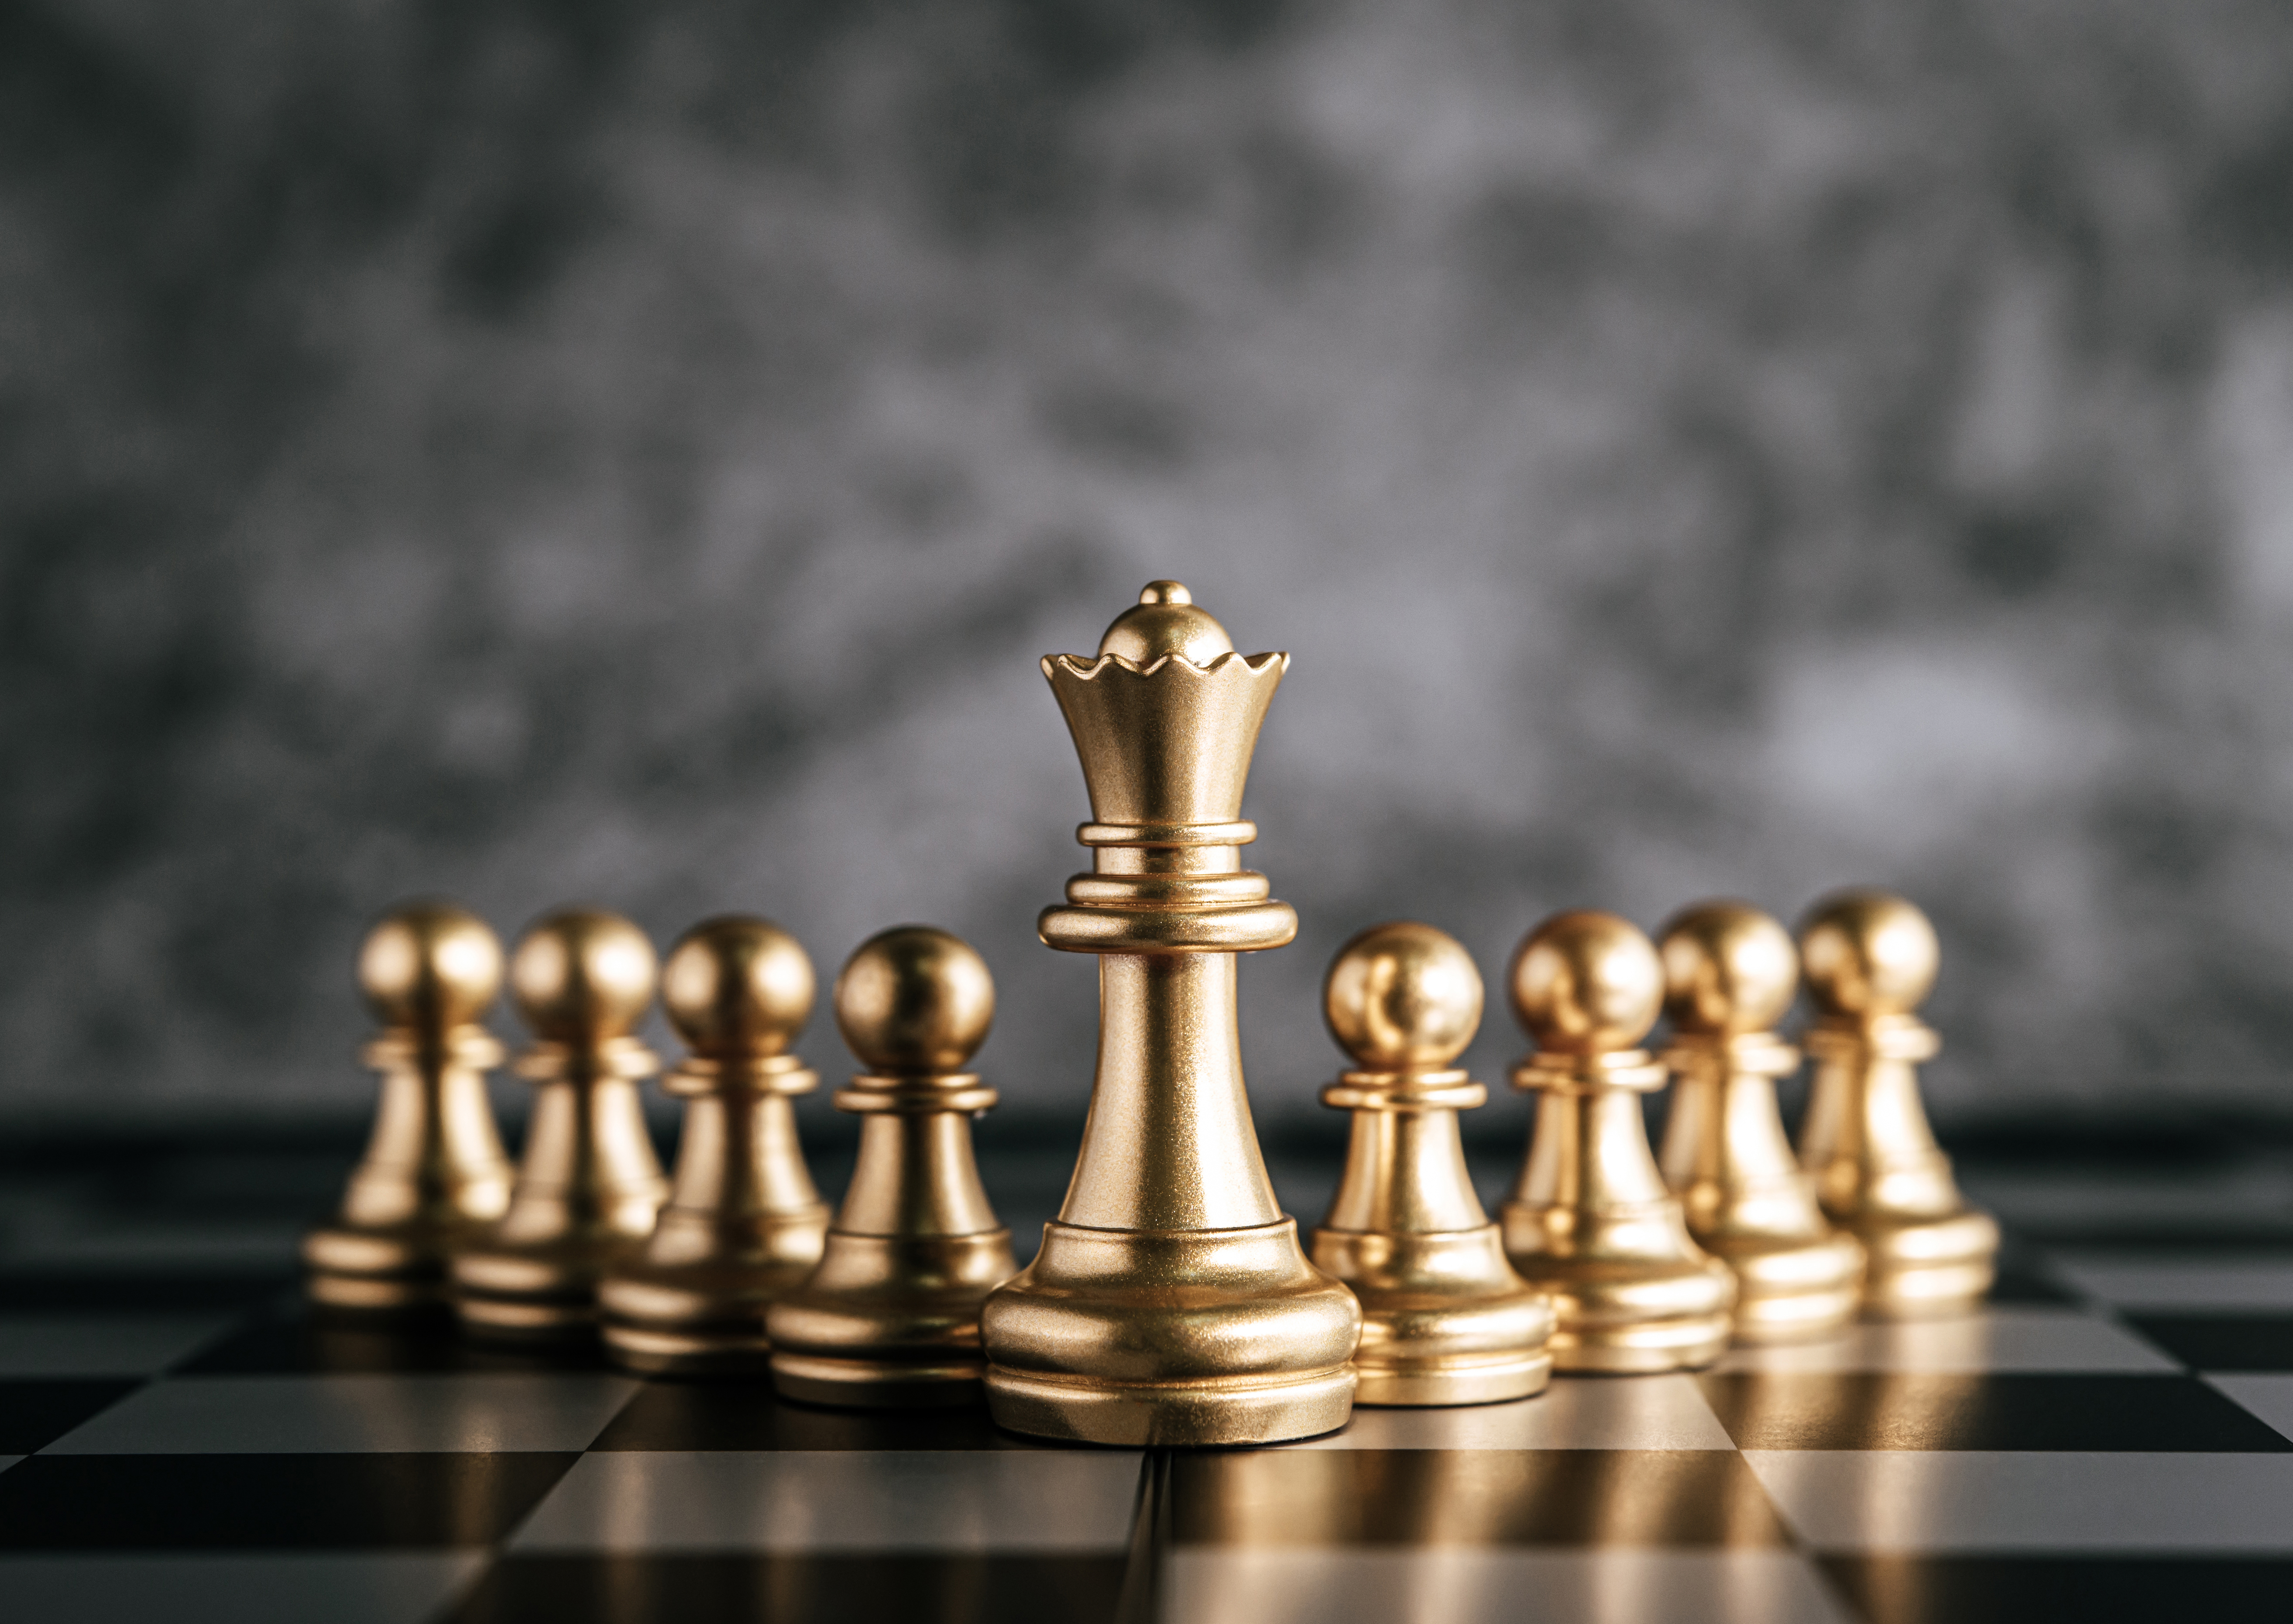 gold-chess-chess-board-game-business-metaphor-leadership-concept.jpg